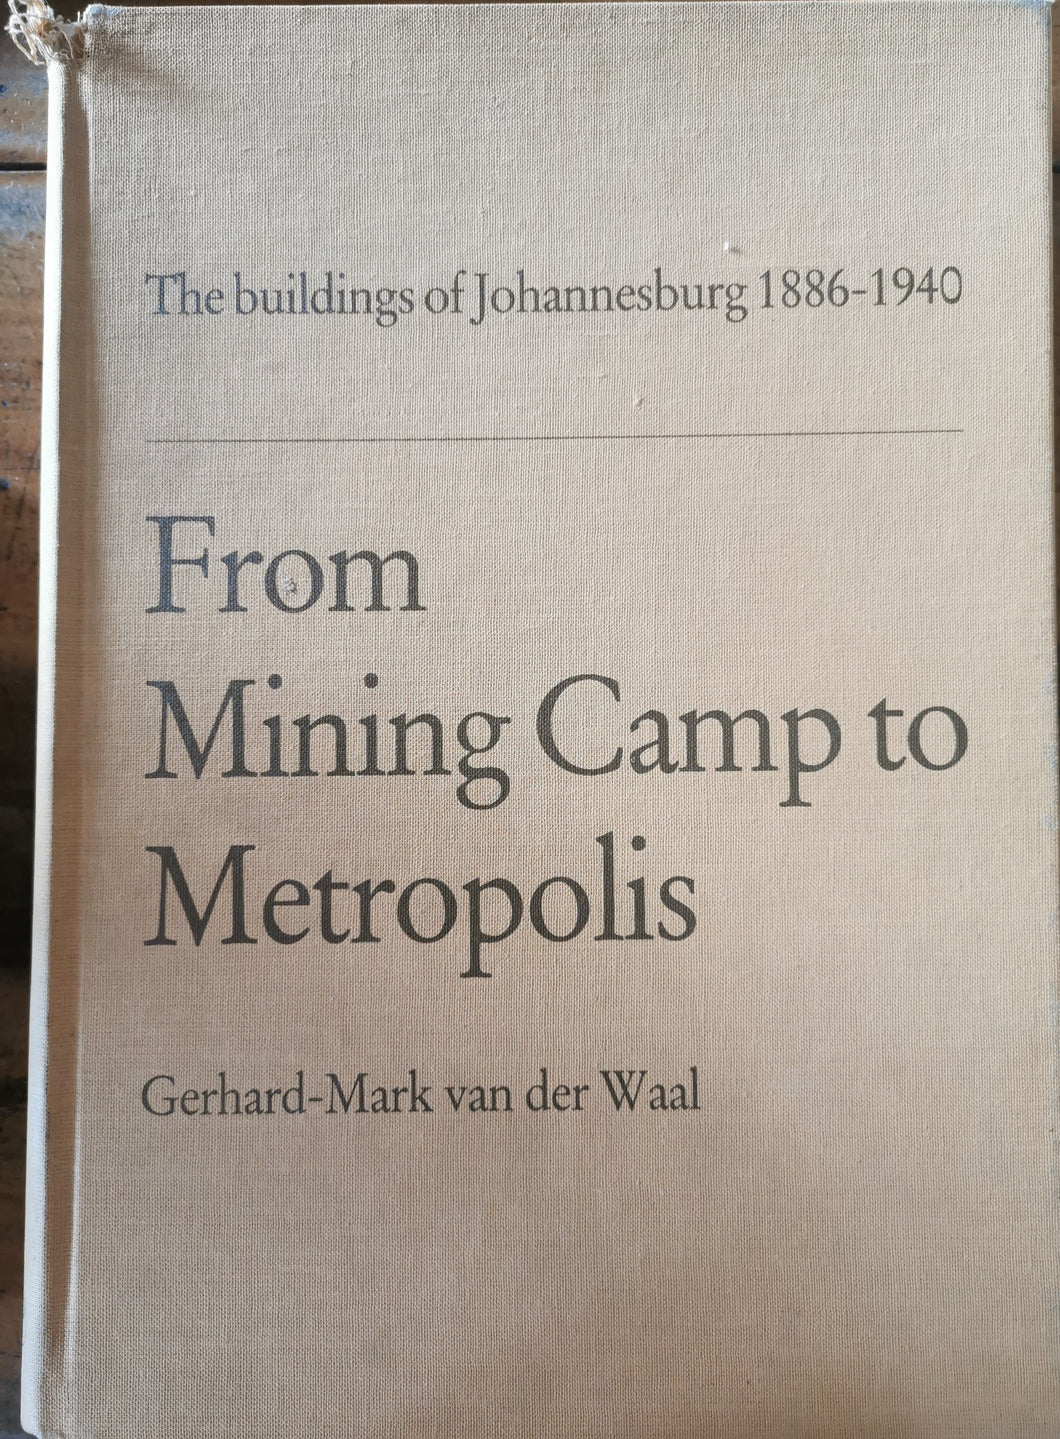 From Mining Camp to Metropolis: The Buildings of Johannesburg 1886-1940